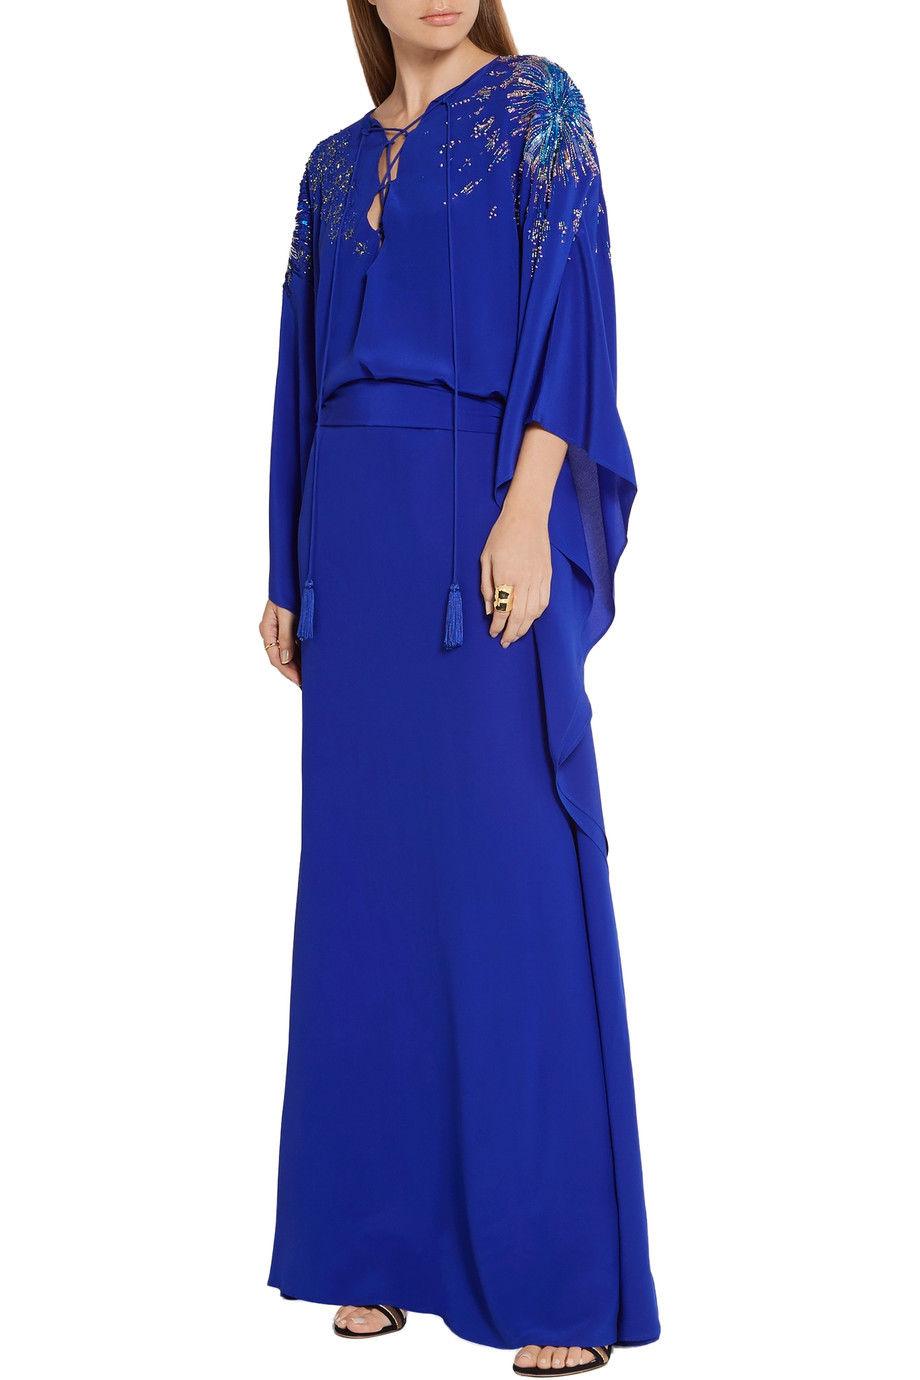 NWT $3650 Roberto Cavalli Blue Silk Firework Embellished Caftan 40 Oversize In New Condition For Sale In Montgomery, TX